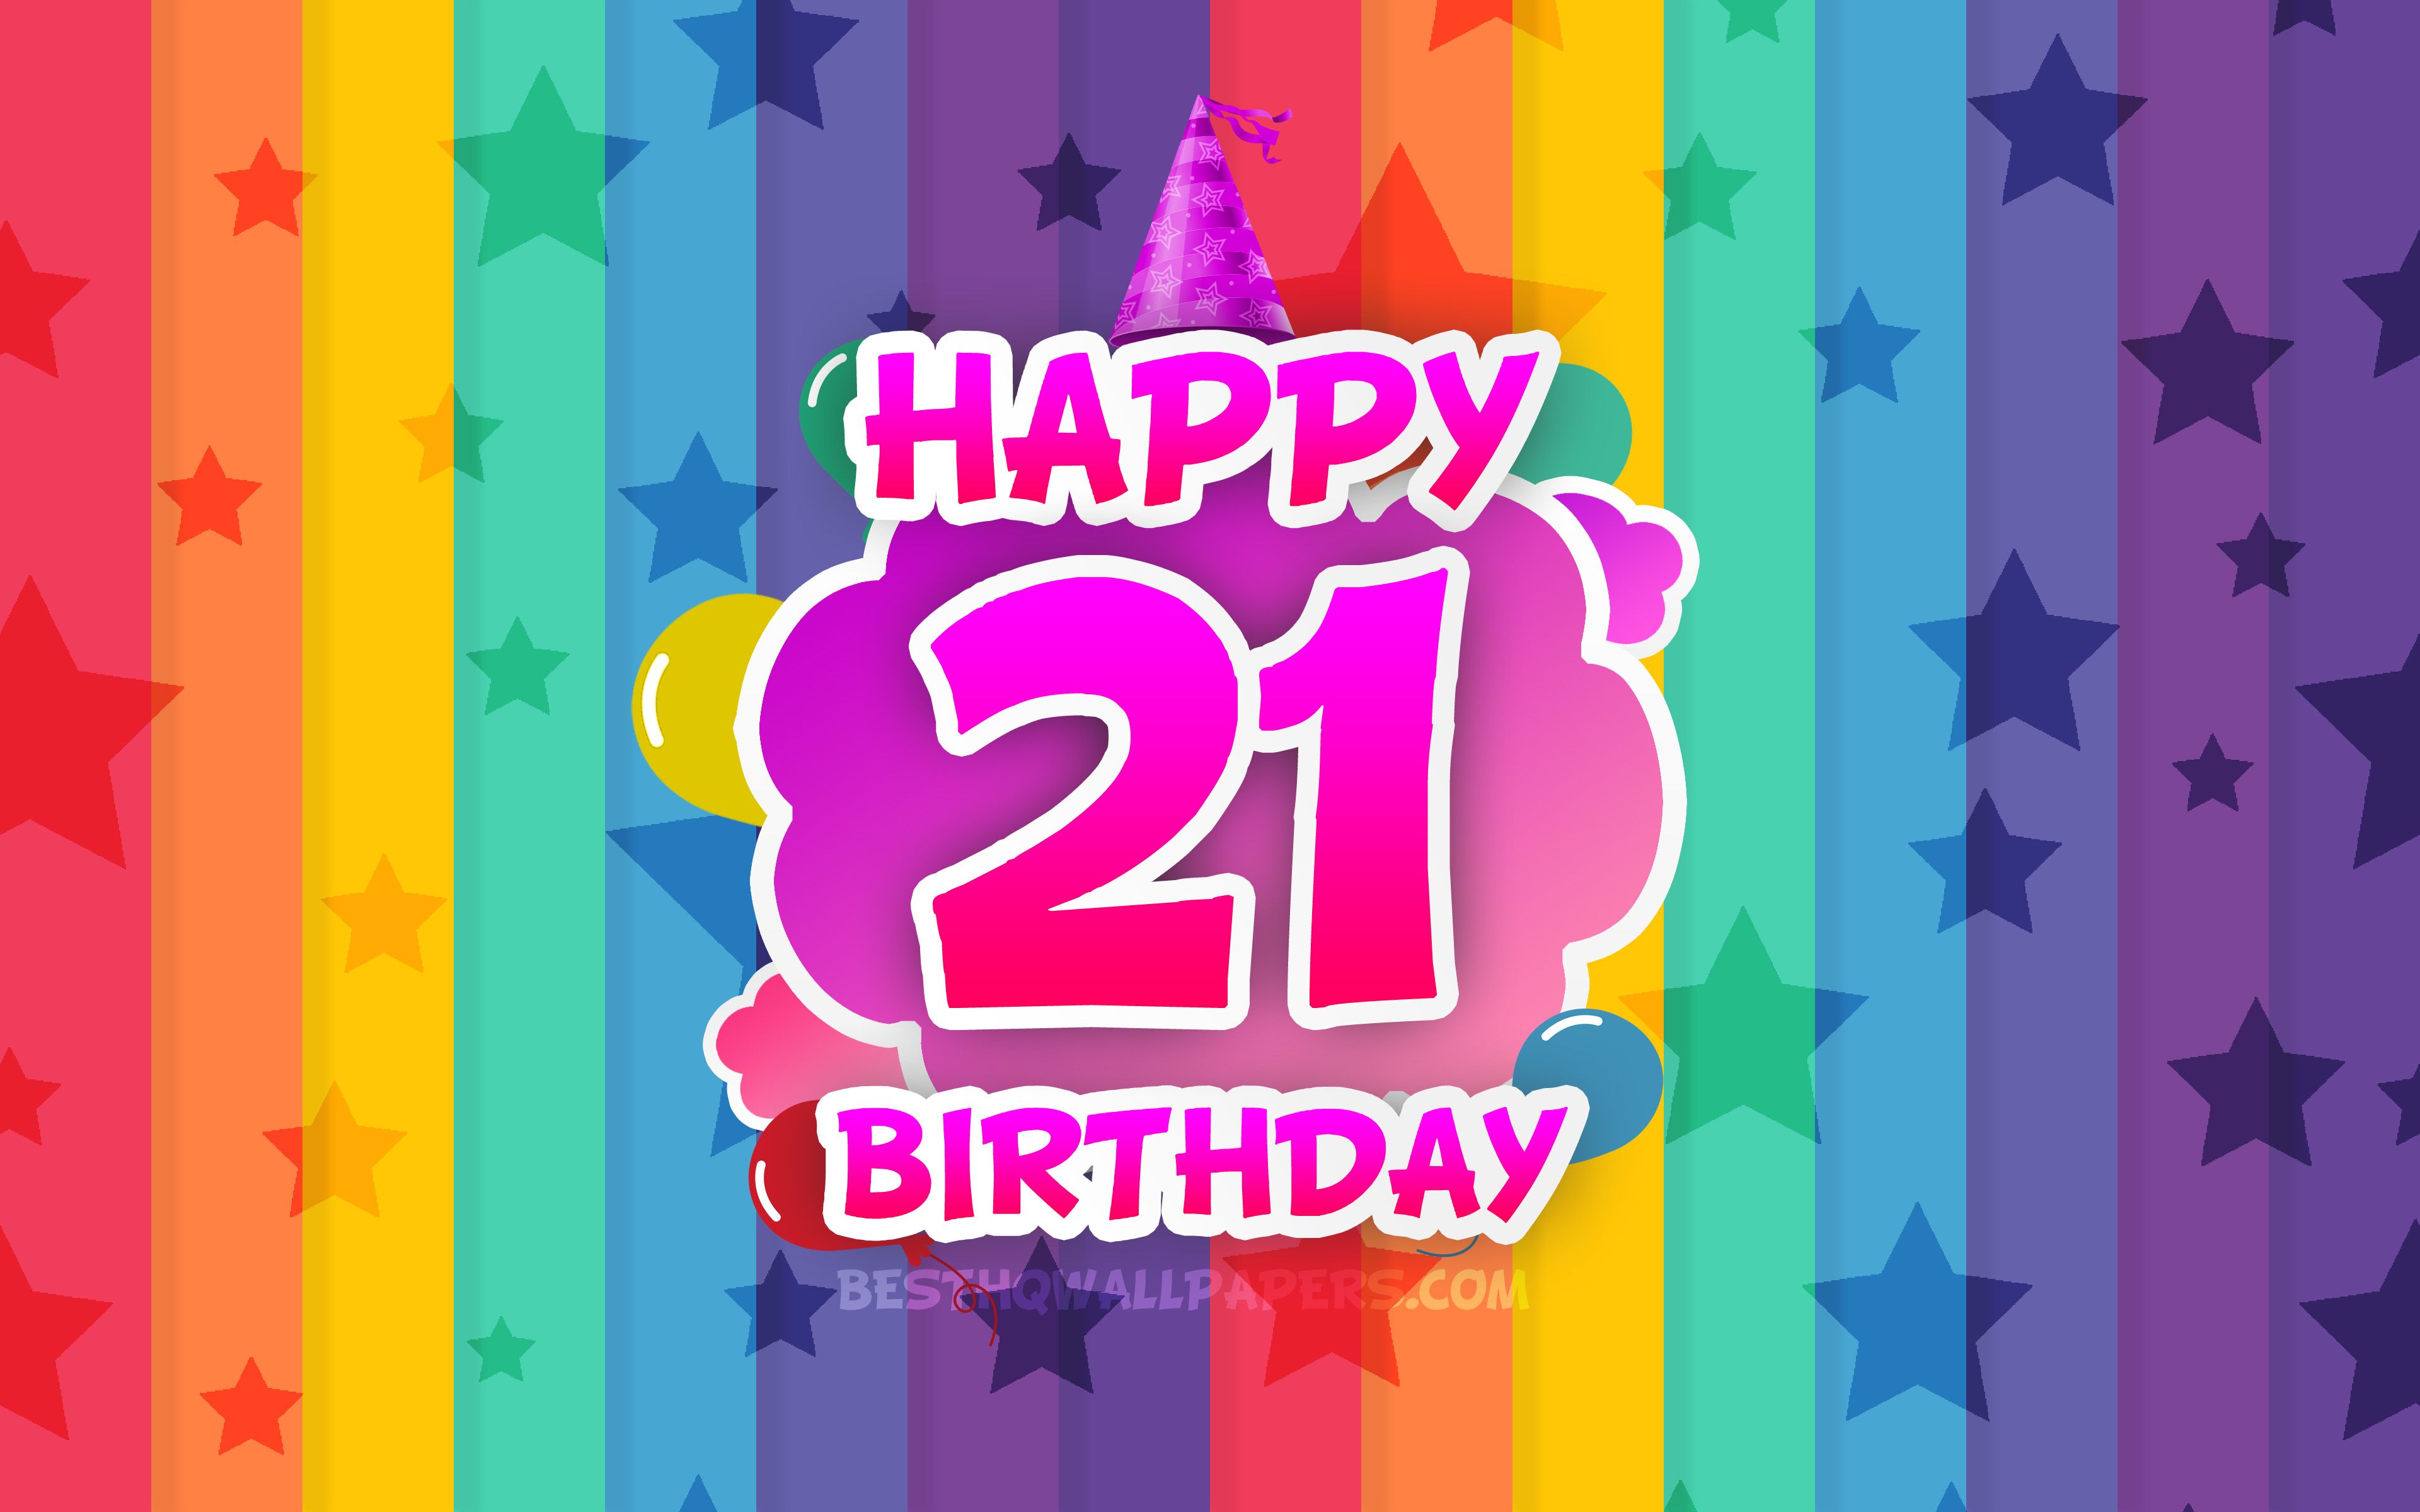 Download wallpaper Happy 21st birthday, colorful clouds, 4k, Birthday concept, rainbow background, Happy 21 Years Birthday, creative 3D letters, 21st Birthday, Birthday Party, 21st Birthday Party for desktop with resolution 3840x2400. High